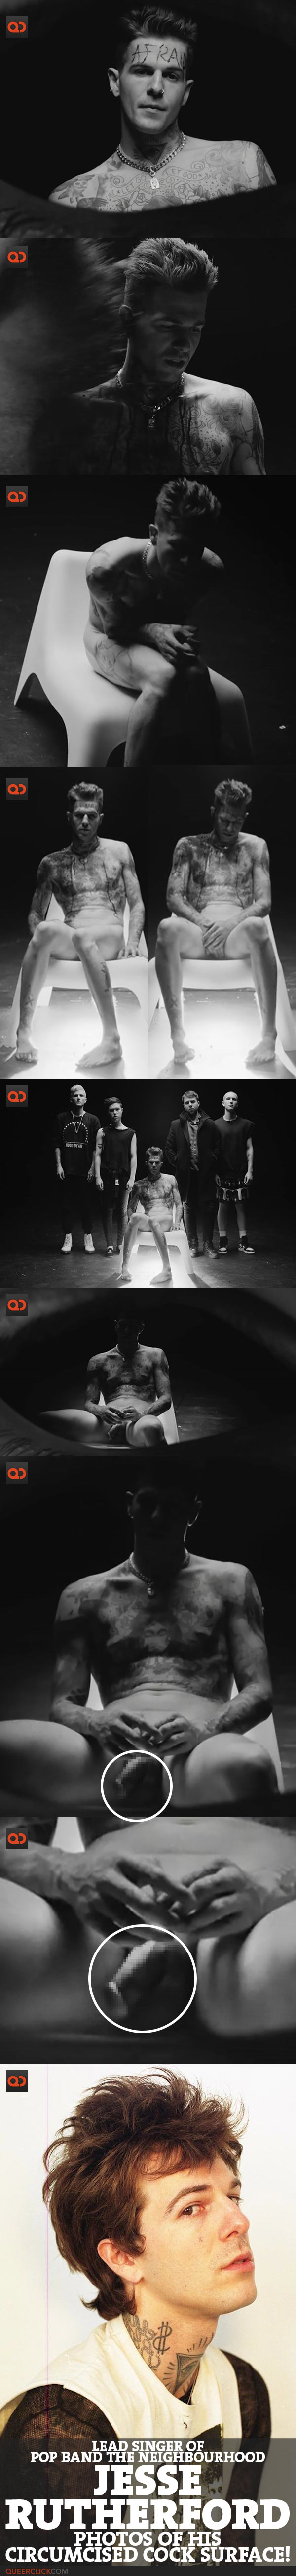 Jesse Rutherford, Lead Singer Of Pop Band “The Neighbourhood”, Photos Of His Circumcised Cock Surface!